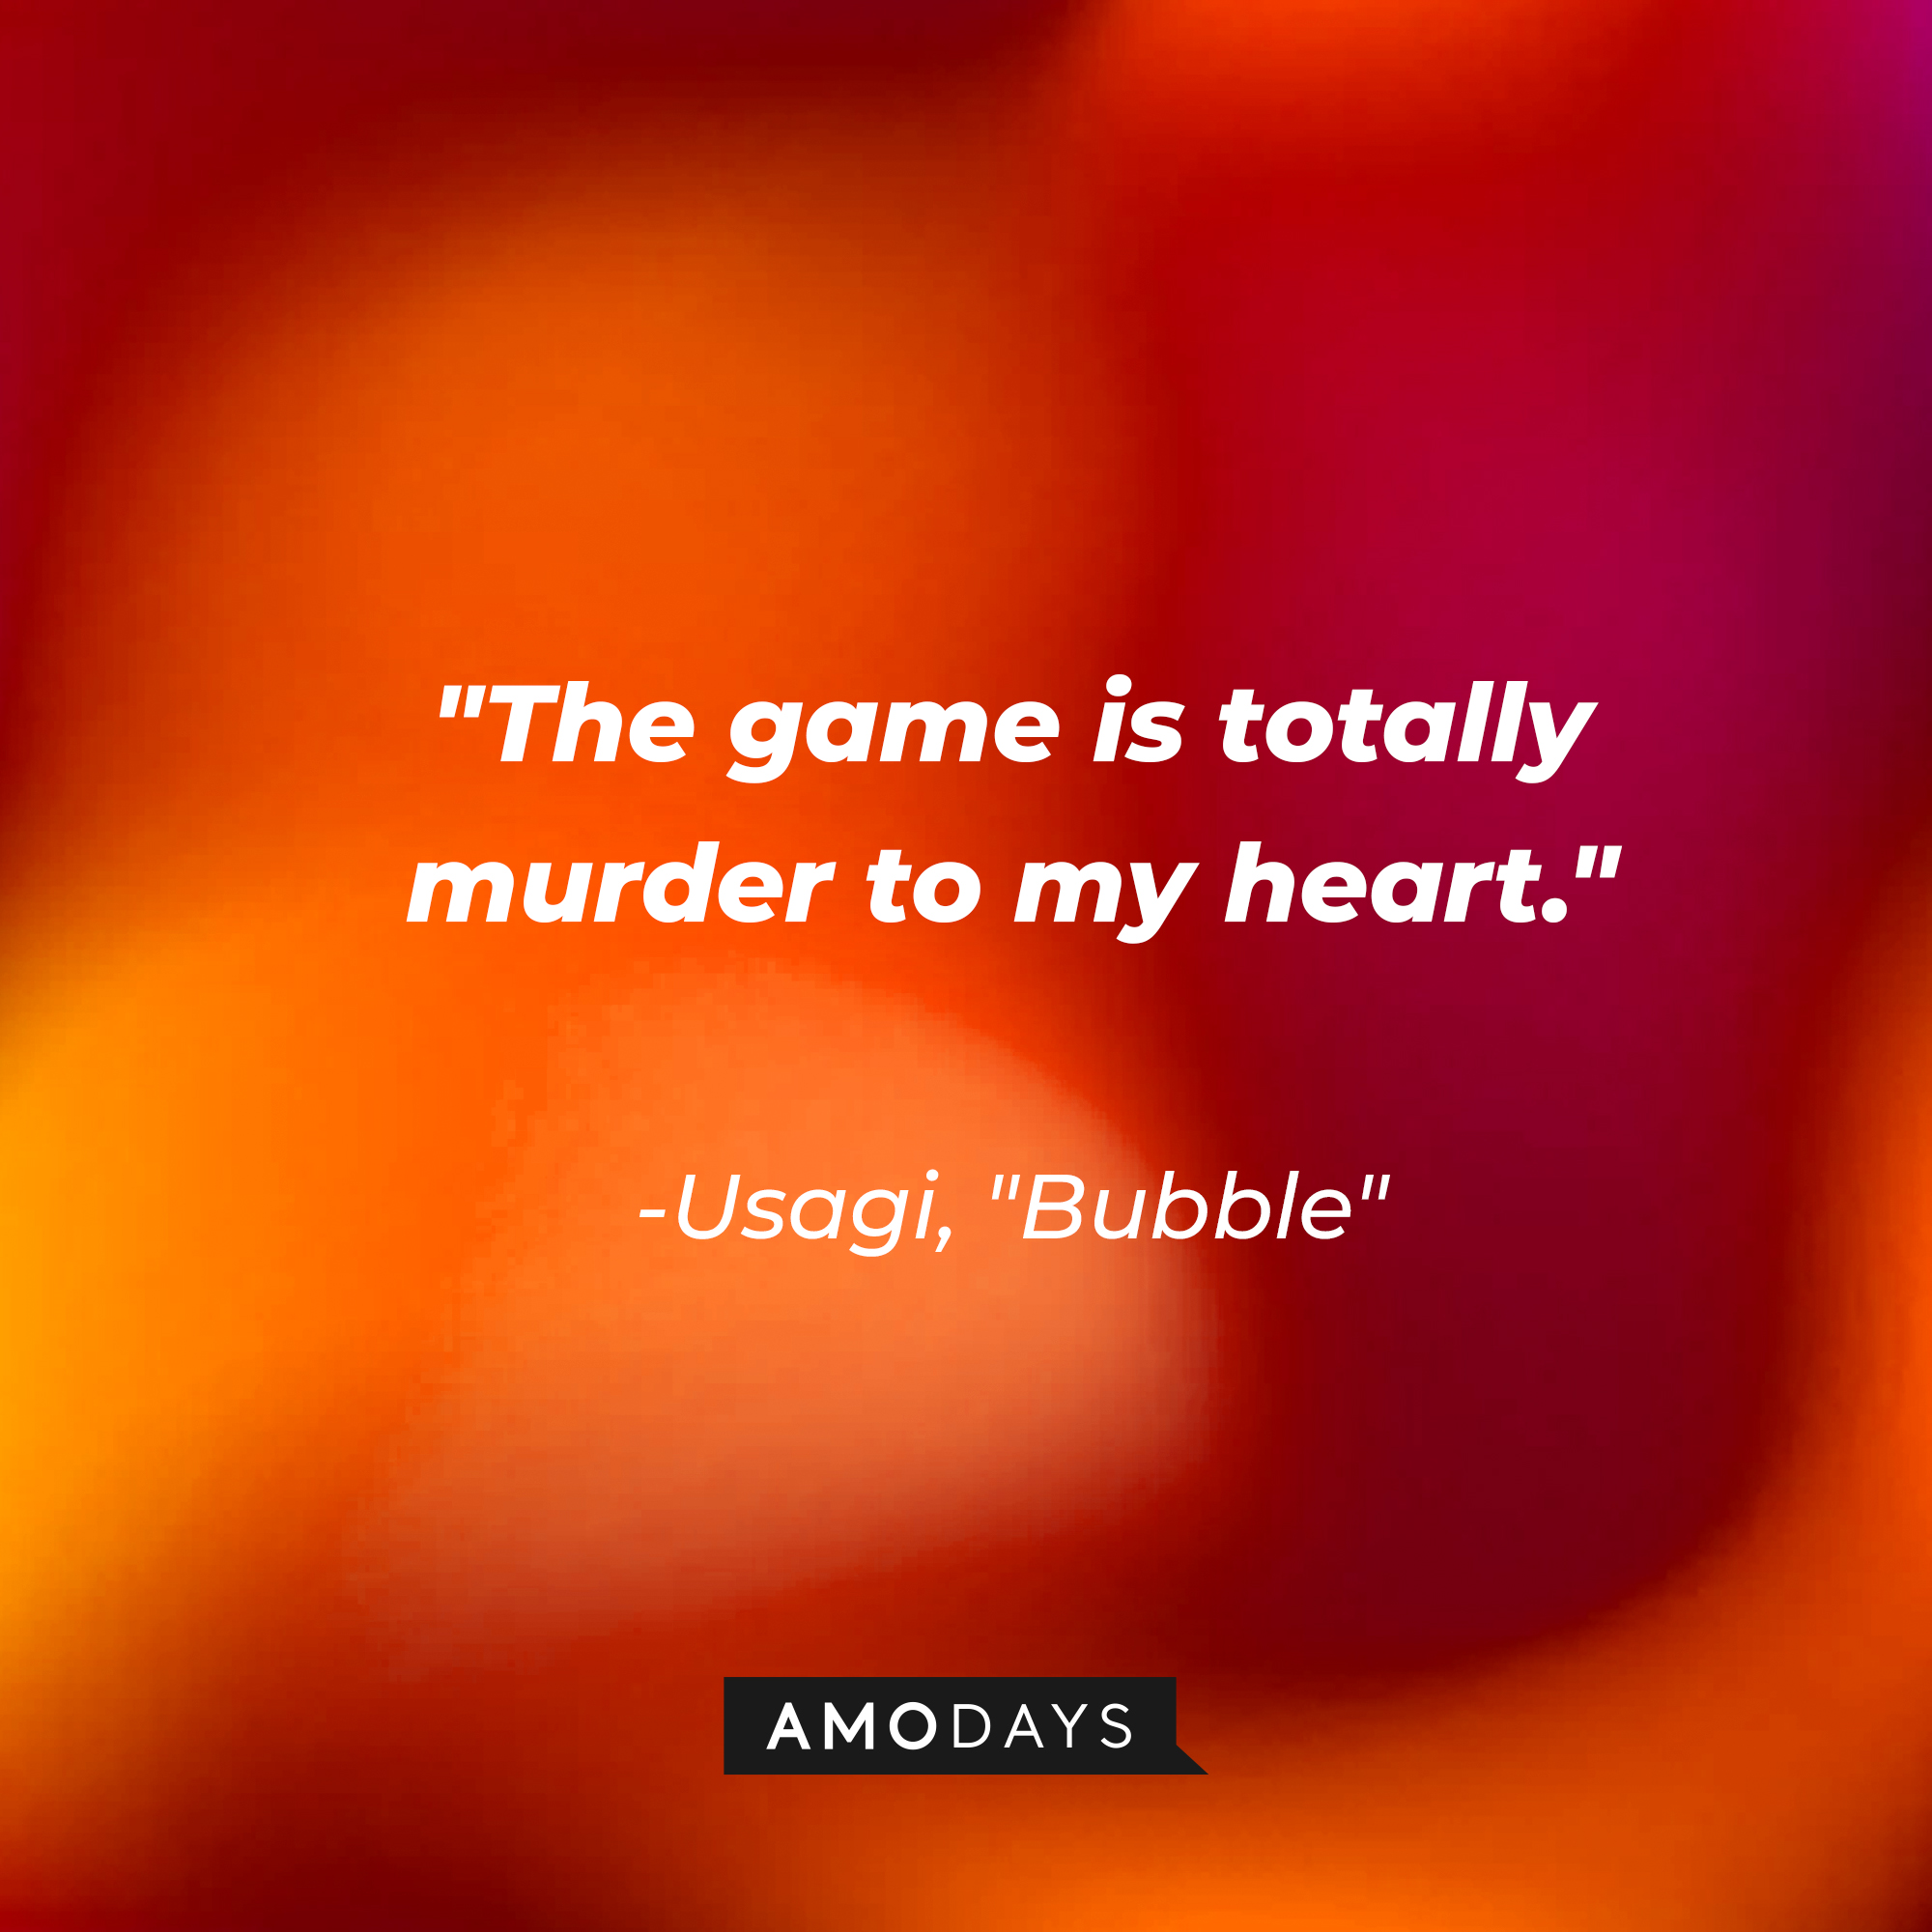 Makoto's quote on "Bubble:" "The game is totally murder to my heart." | Source: AmoDays